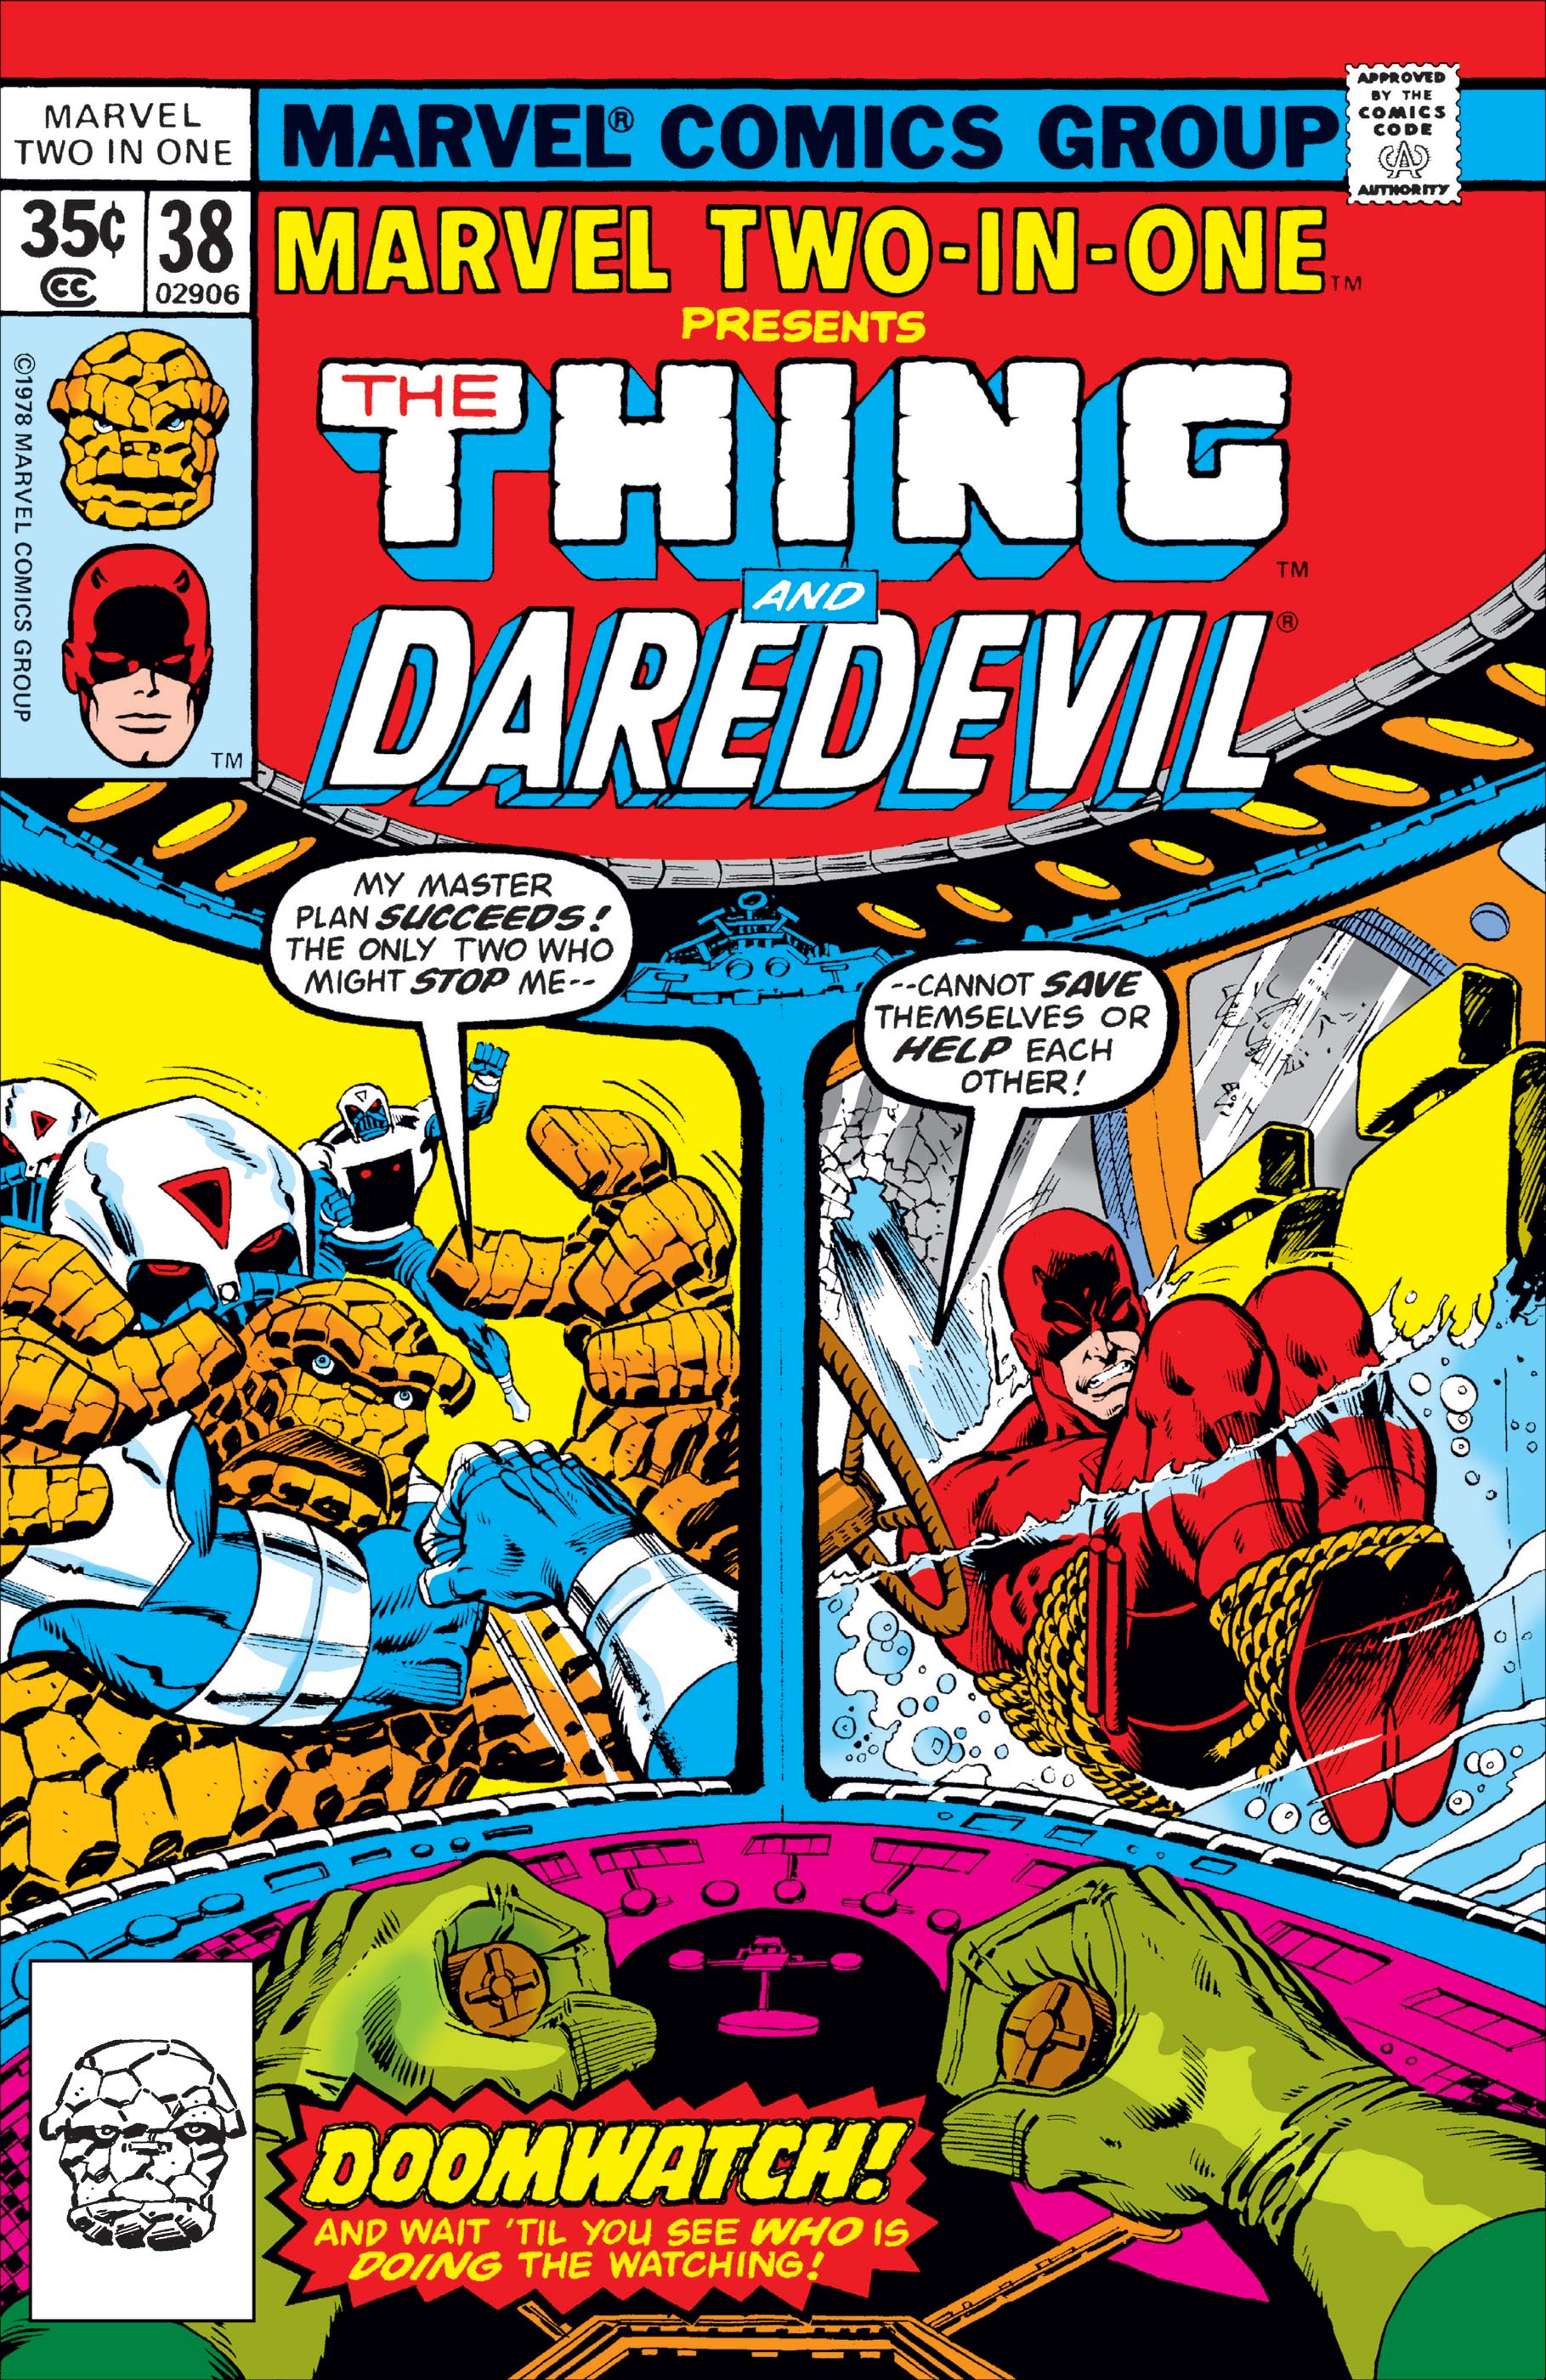 Marvel Two-in-One (1974) #38